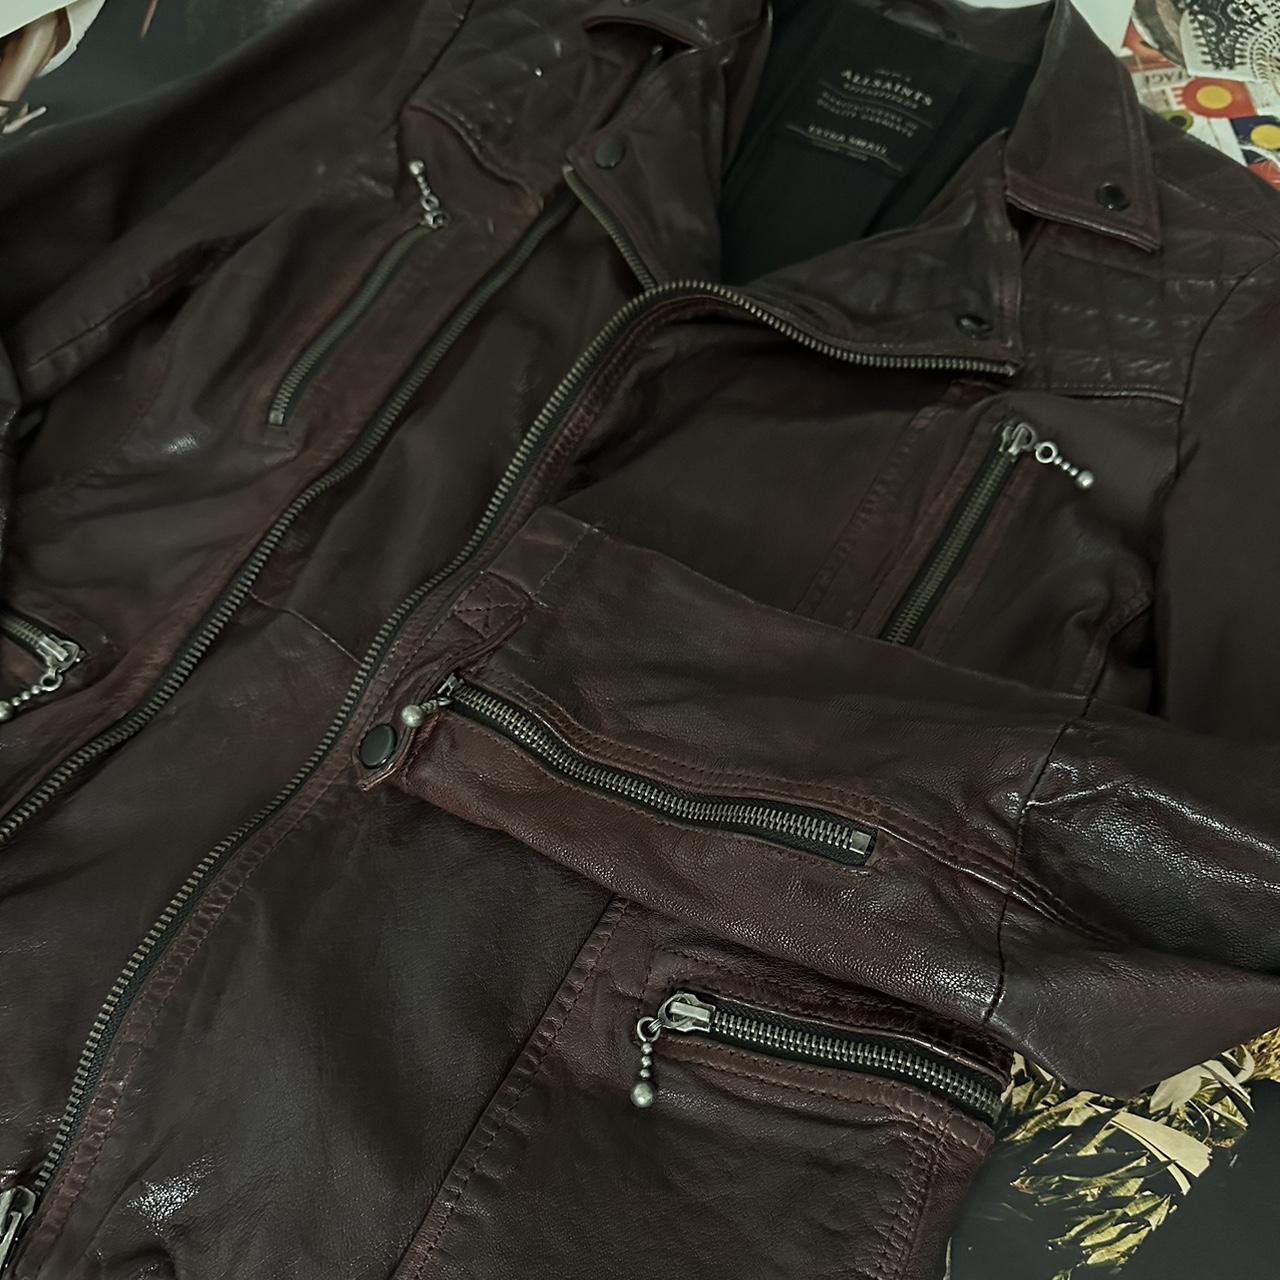 Allsaints Conroy Burgundy Leather Jacket Outfit - Your Average Guy